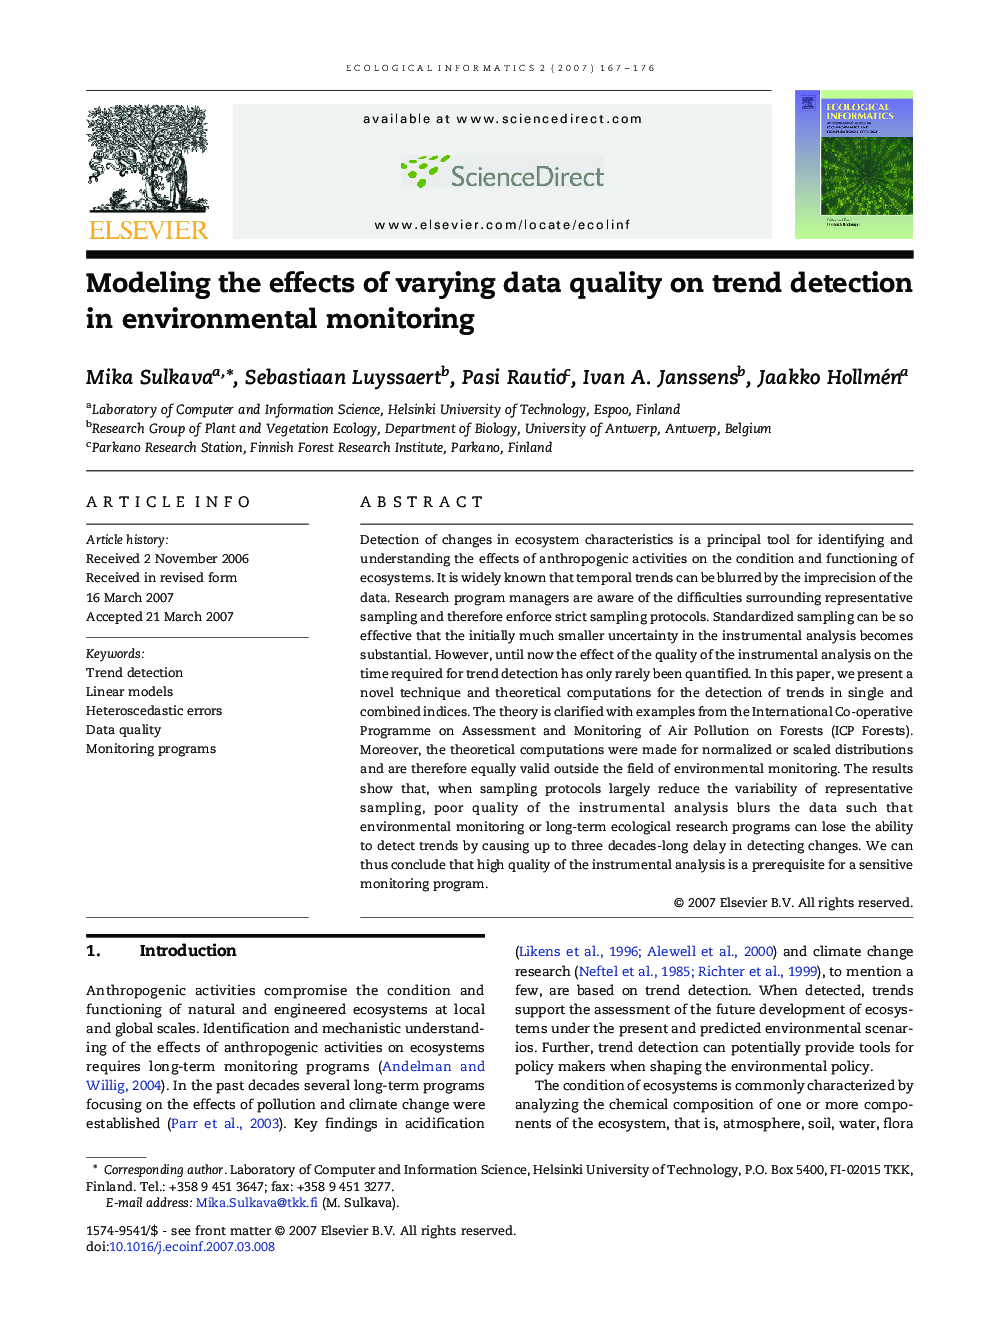 Modeling the effects of varying data quality on trend detection in environmental monitoring